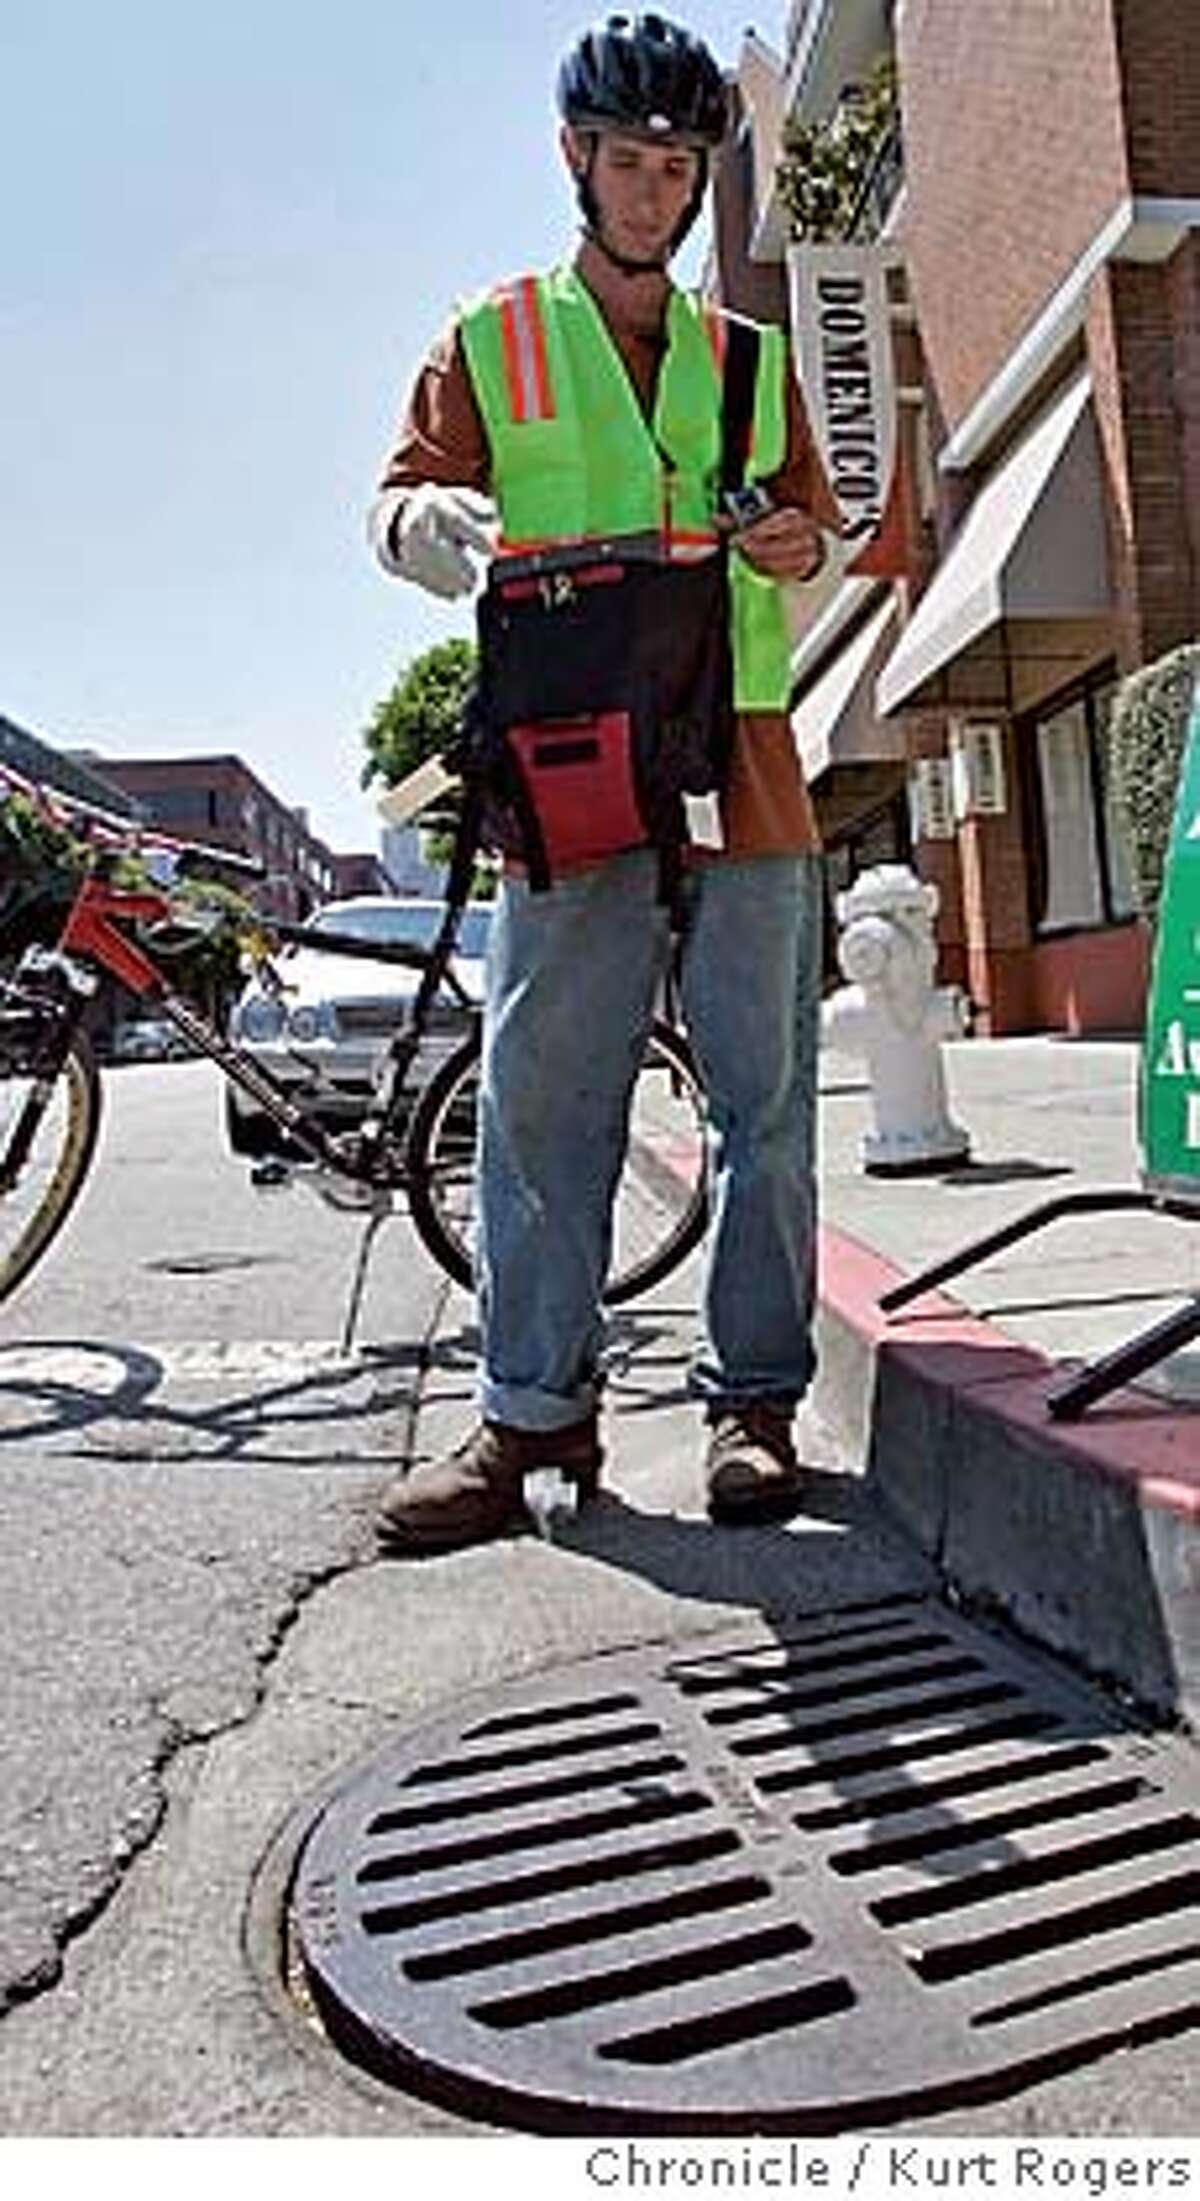 Jim Henning 24 of San Francisco who was hired to be a bike messenger to do mosquito abatement in San Francisco. droups a bag of Altosid pellets into the storm drane at Lombard and Sansome. A day after SF identifies its first-ever case of West Nile virus, a fleet of bike messengers is being dispatched to catch basins throughout San Francisco equipped with Nextel phones with GPS satellite capabilities along with non-toxic abatement pellets that prevent mosquitoes from maturing. It's an alternative to spraying. Agency coordinating it is the Dept. of Environment. WESTNILE_0115_kr.JPG 8/16/05 in San Francisco,CA. KURT ROGERS/THE CHRONICLE MANDATORY CREDIT FOR PHOTOG AND SF CHRONICLE/ -MAGS OUT